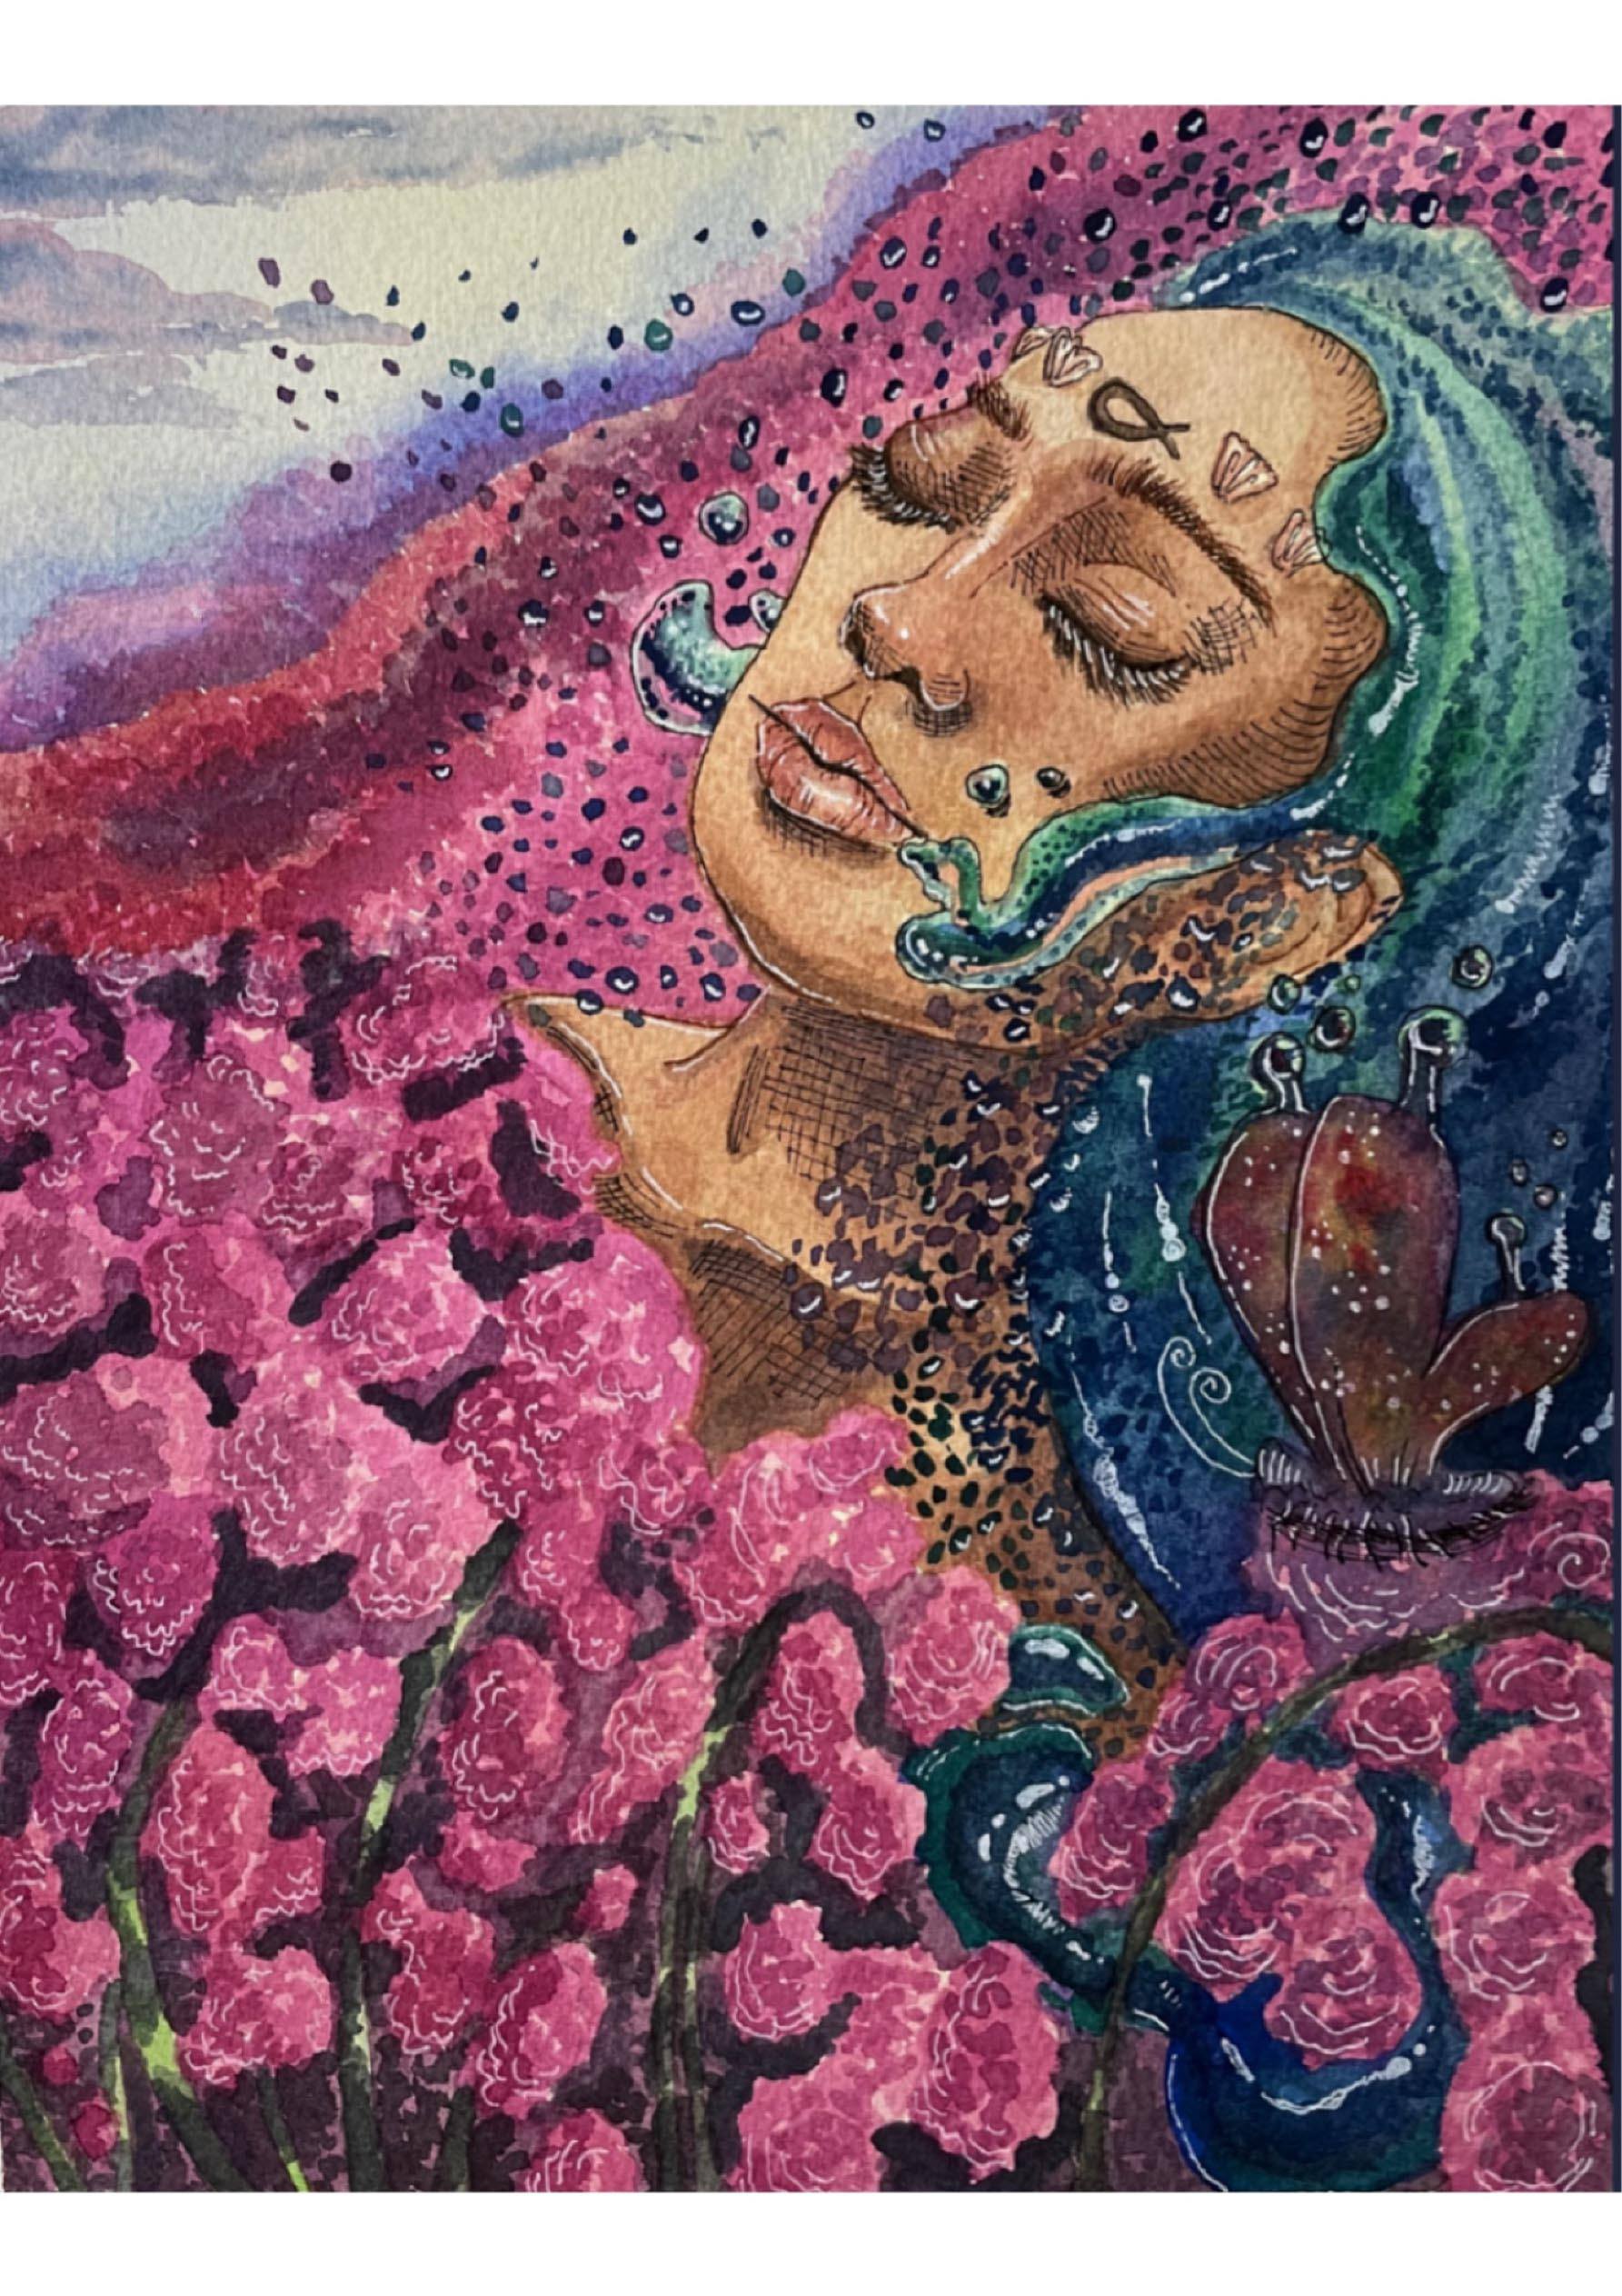 A portrait of a woman in a sea of flowers